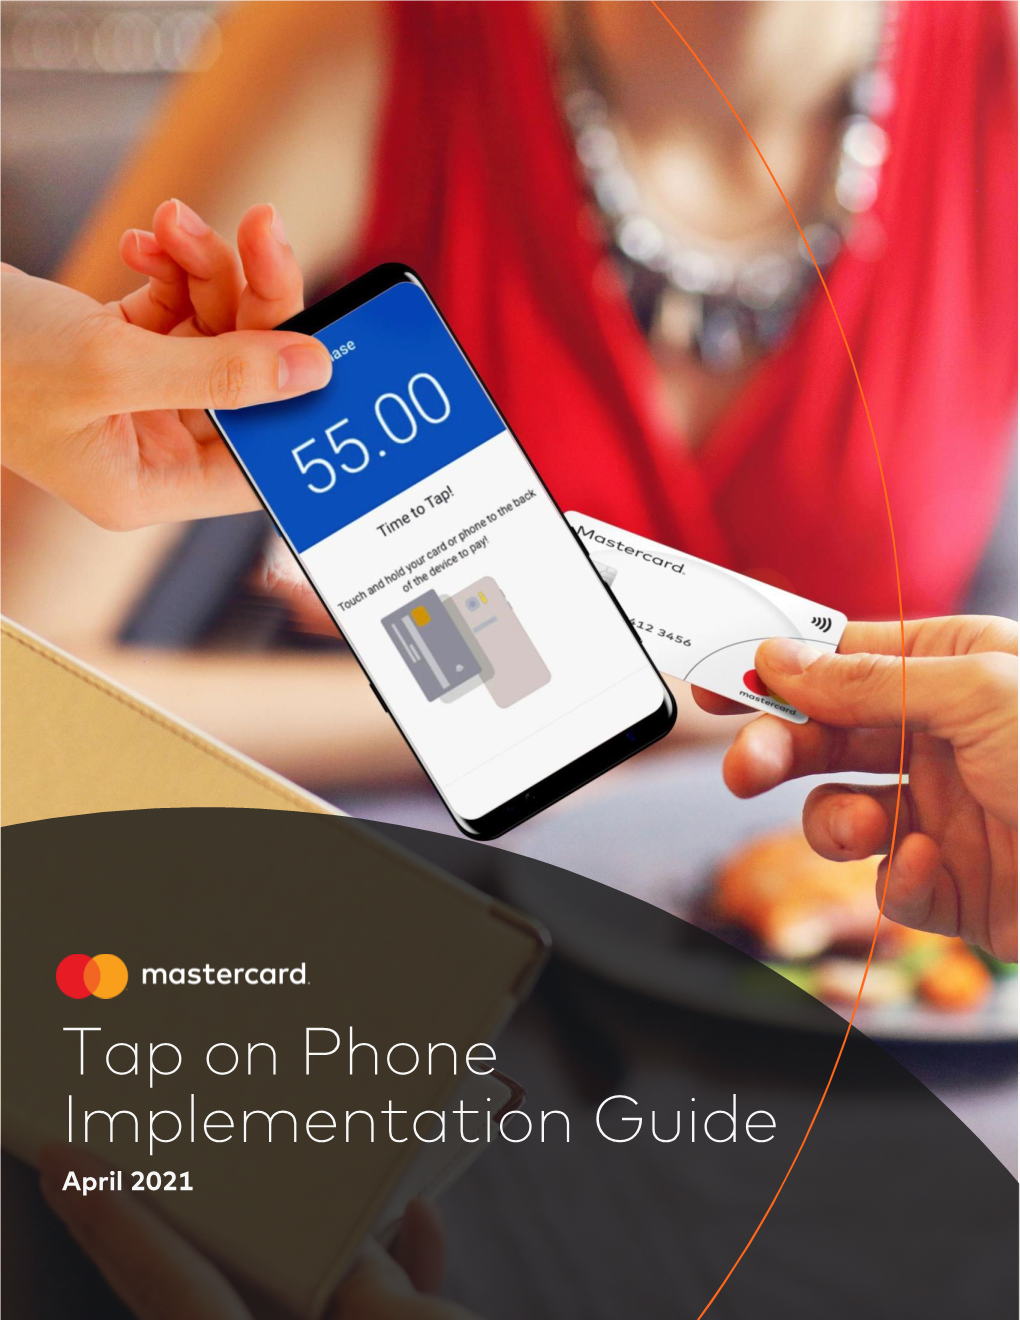 Tap on Phone Implementation Guide April 2021